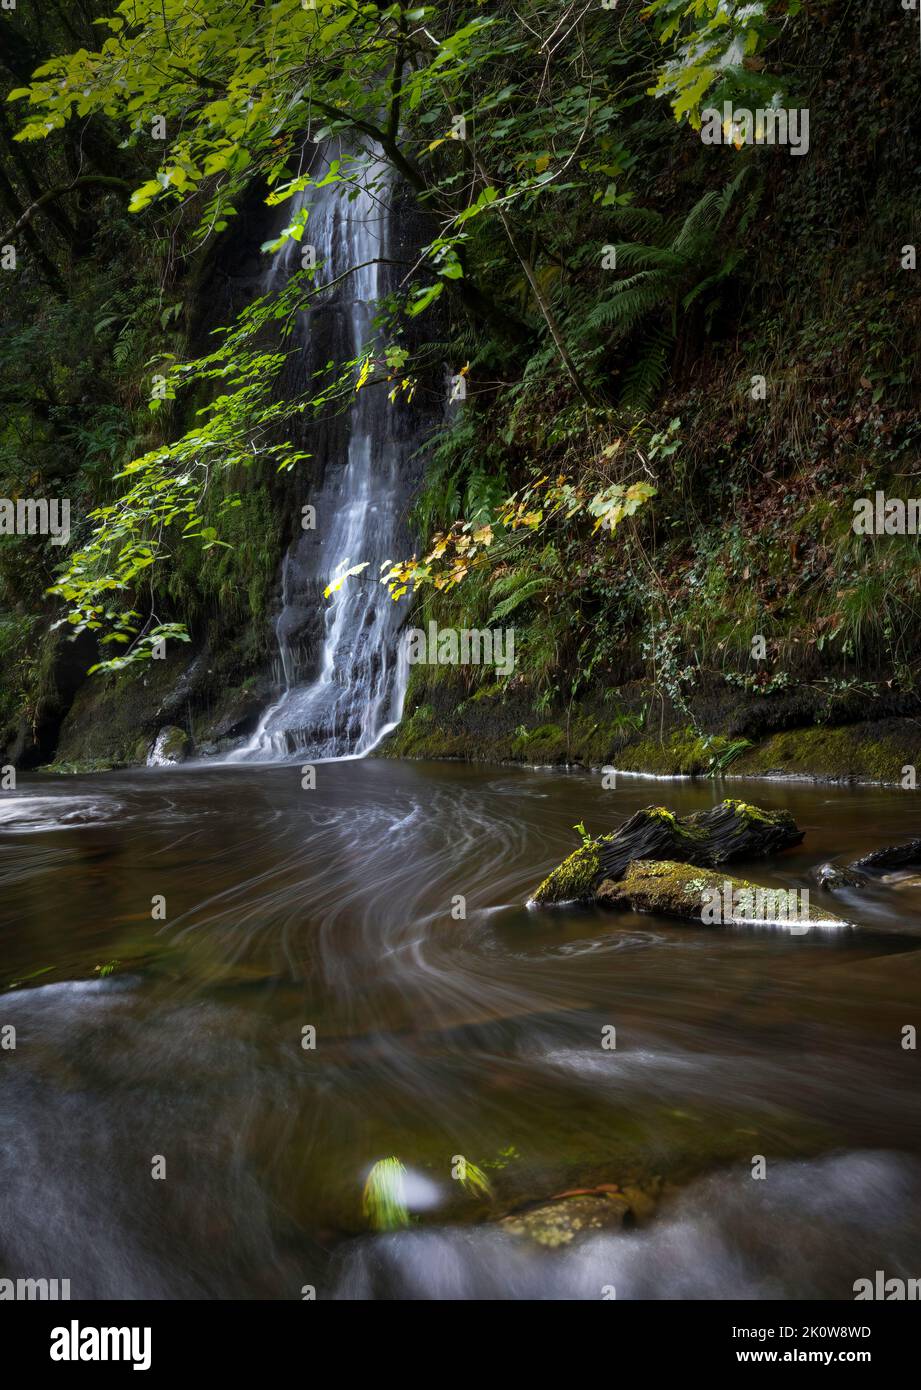 One of the many waterfalls in the South Wales area around Glynneath known as Waterfall Country, this one is on the River Neath. Stock Photo